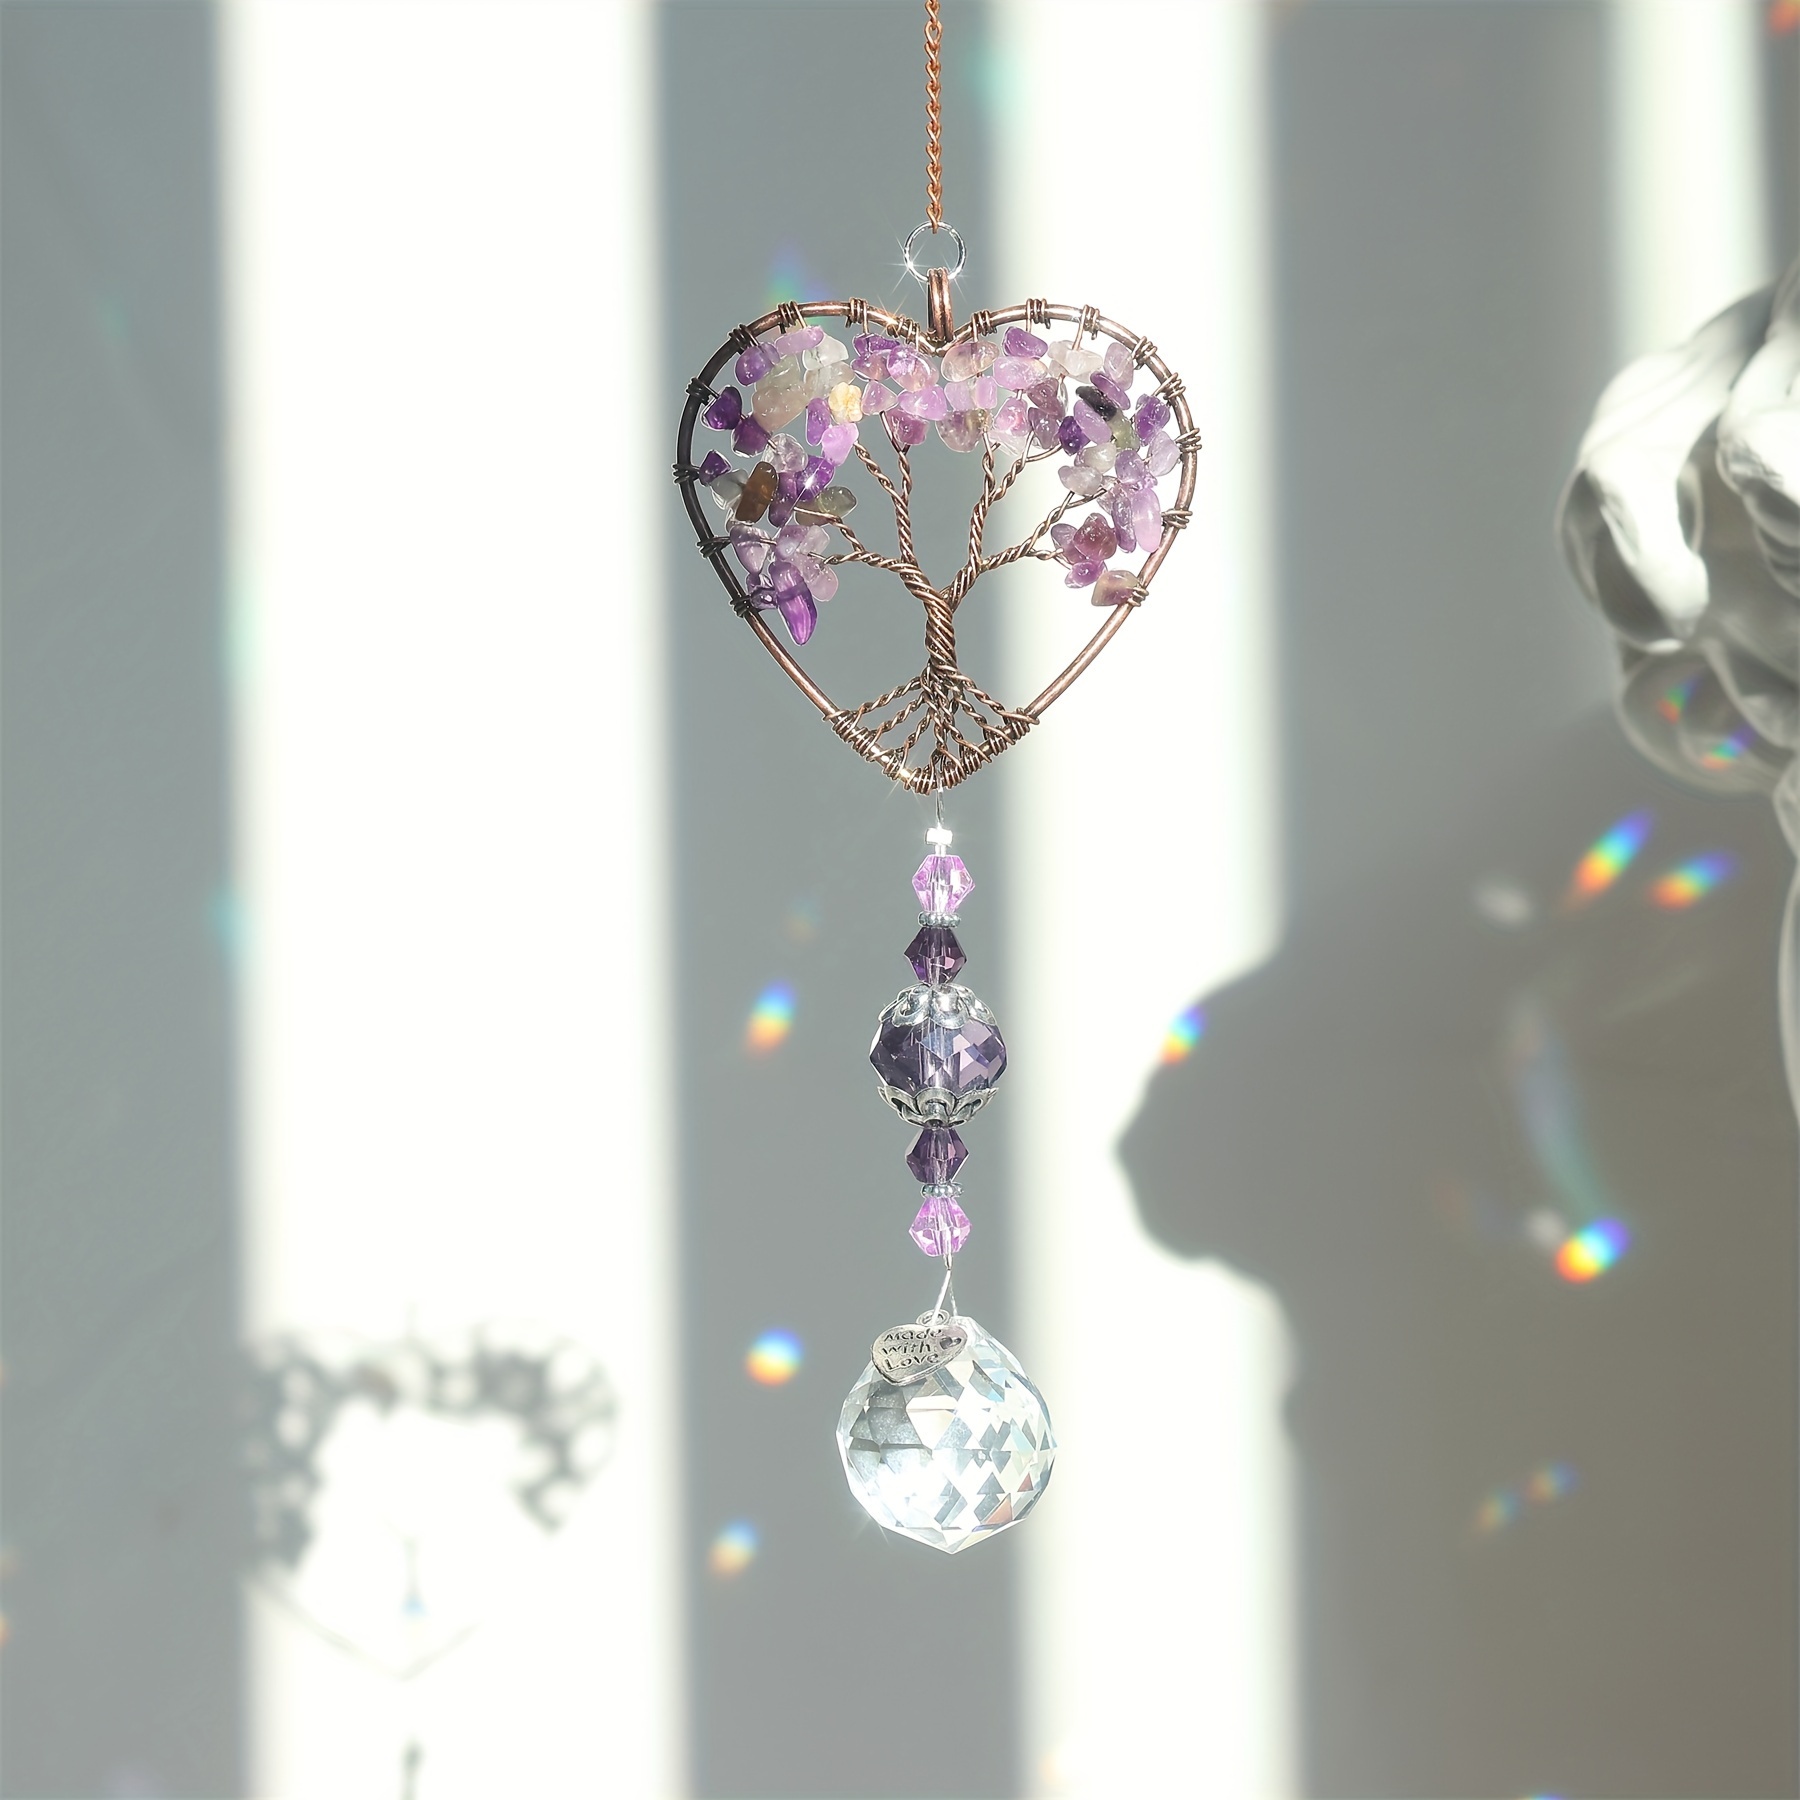 Hanging Ball,hanging Crystal Suncatcher, Home Decor, Rearview